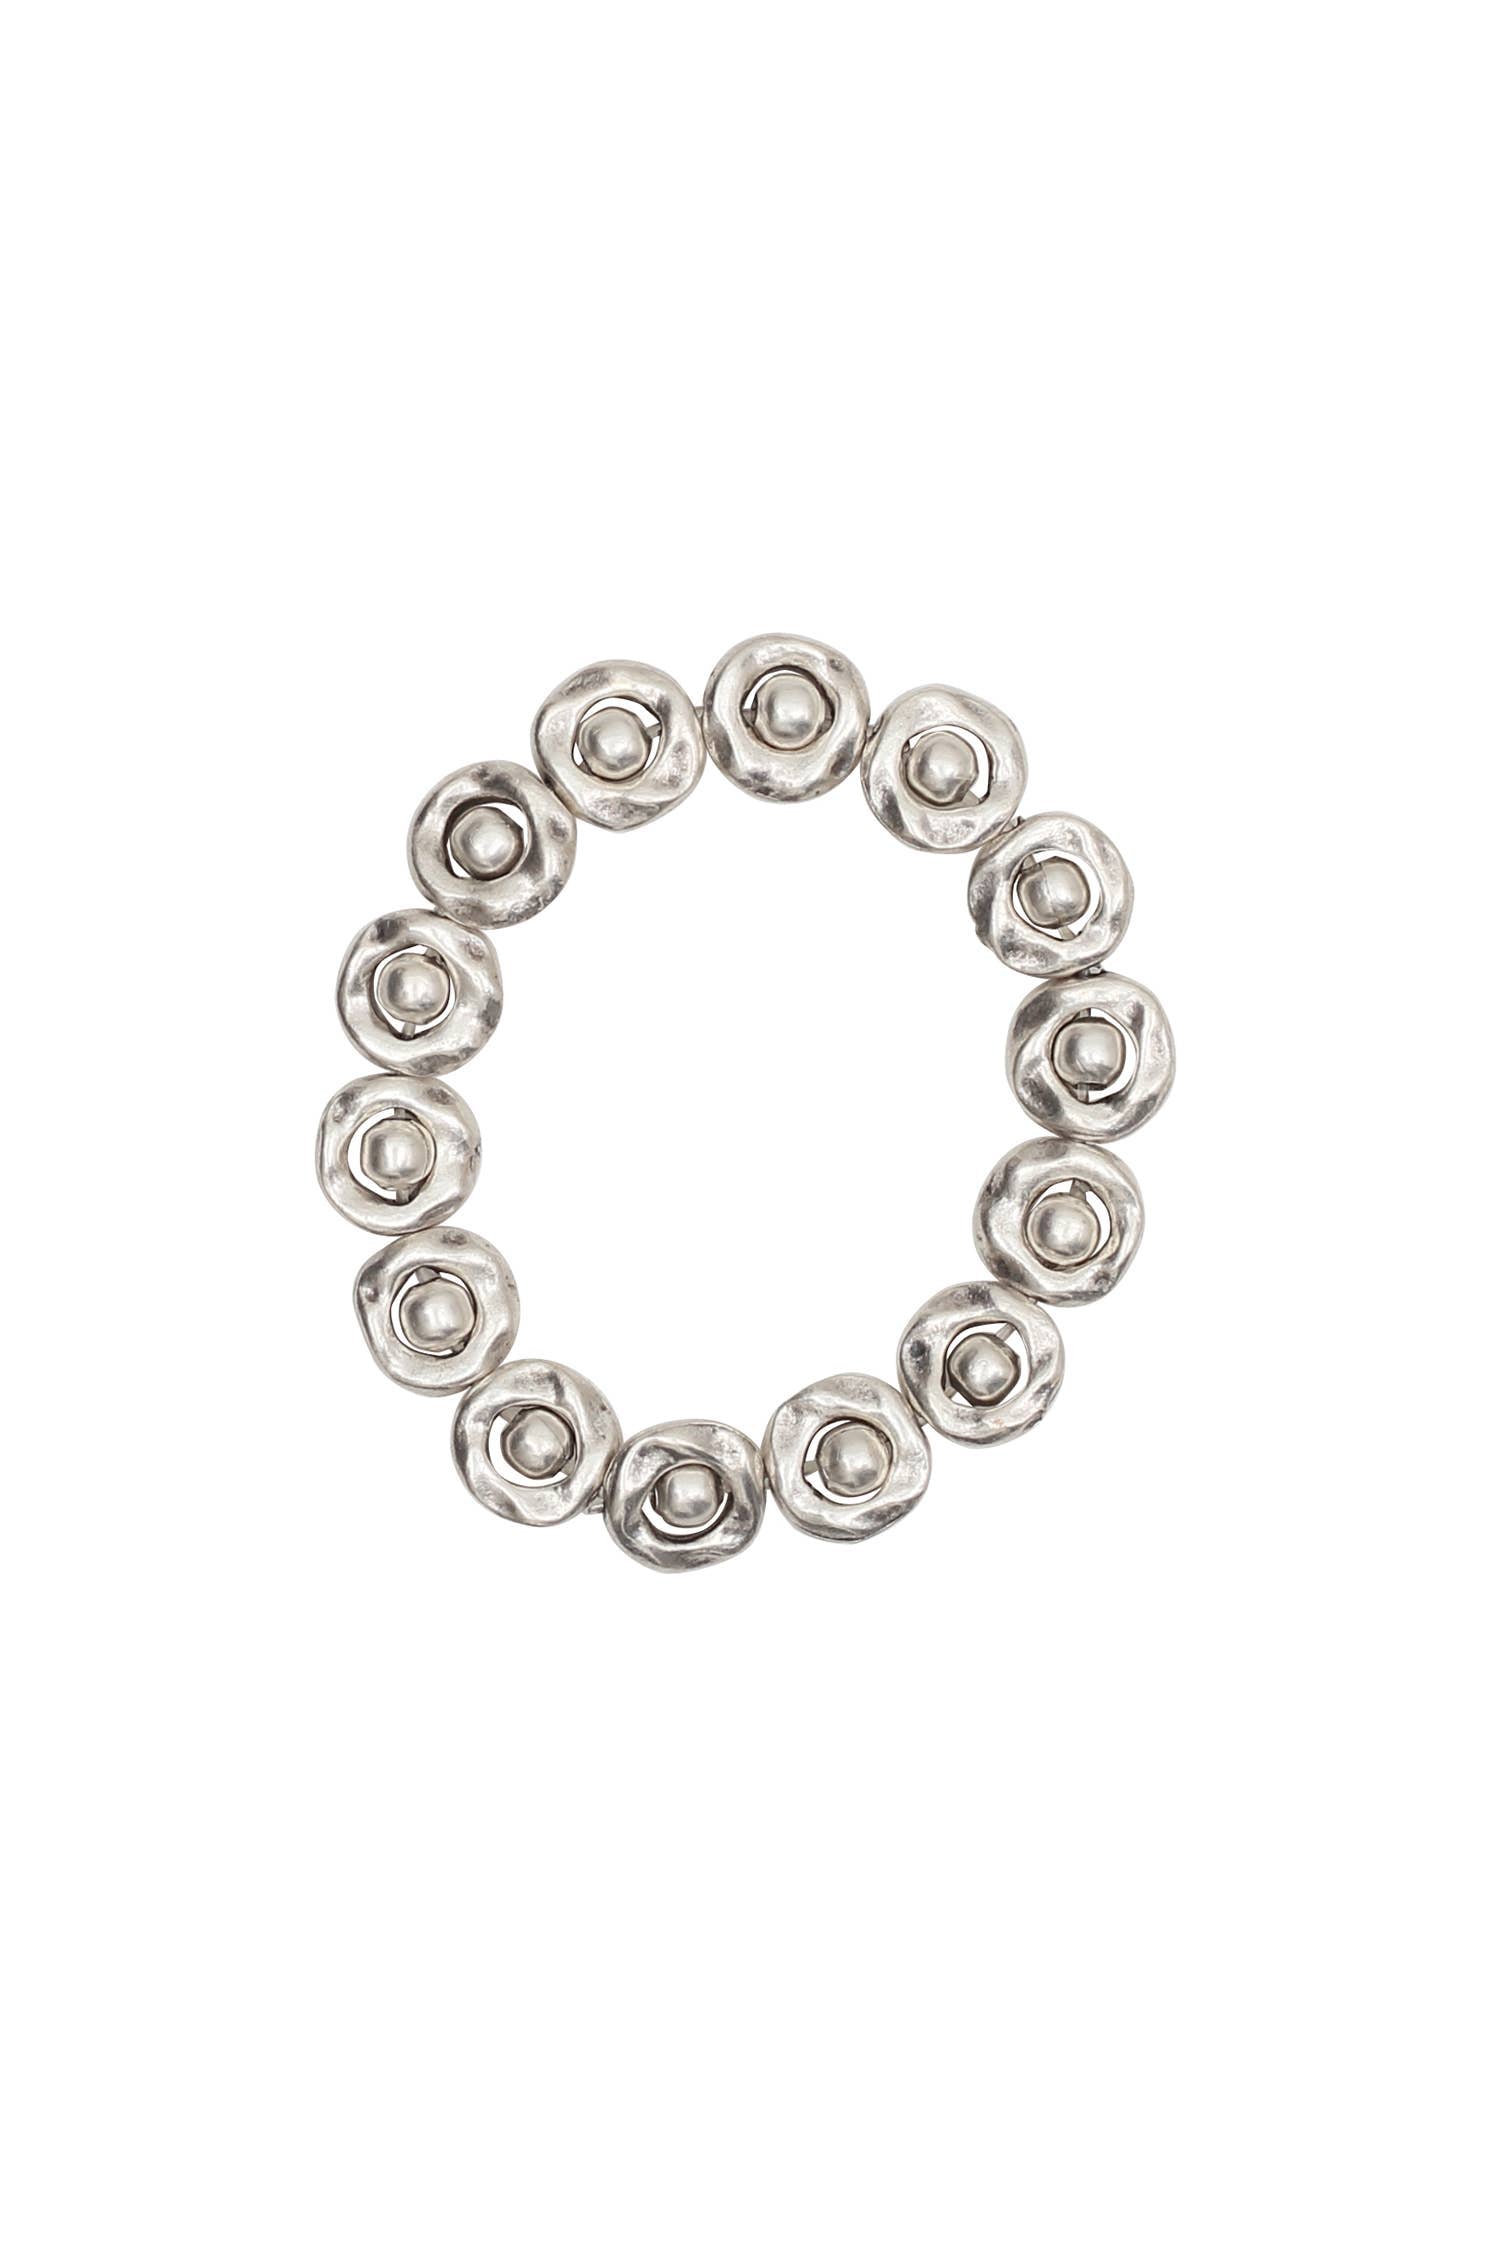 Handmade Pewter Bracelet - Coco and lulu boutique 